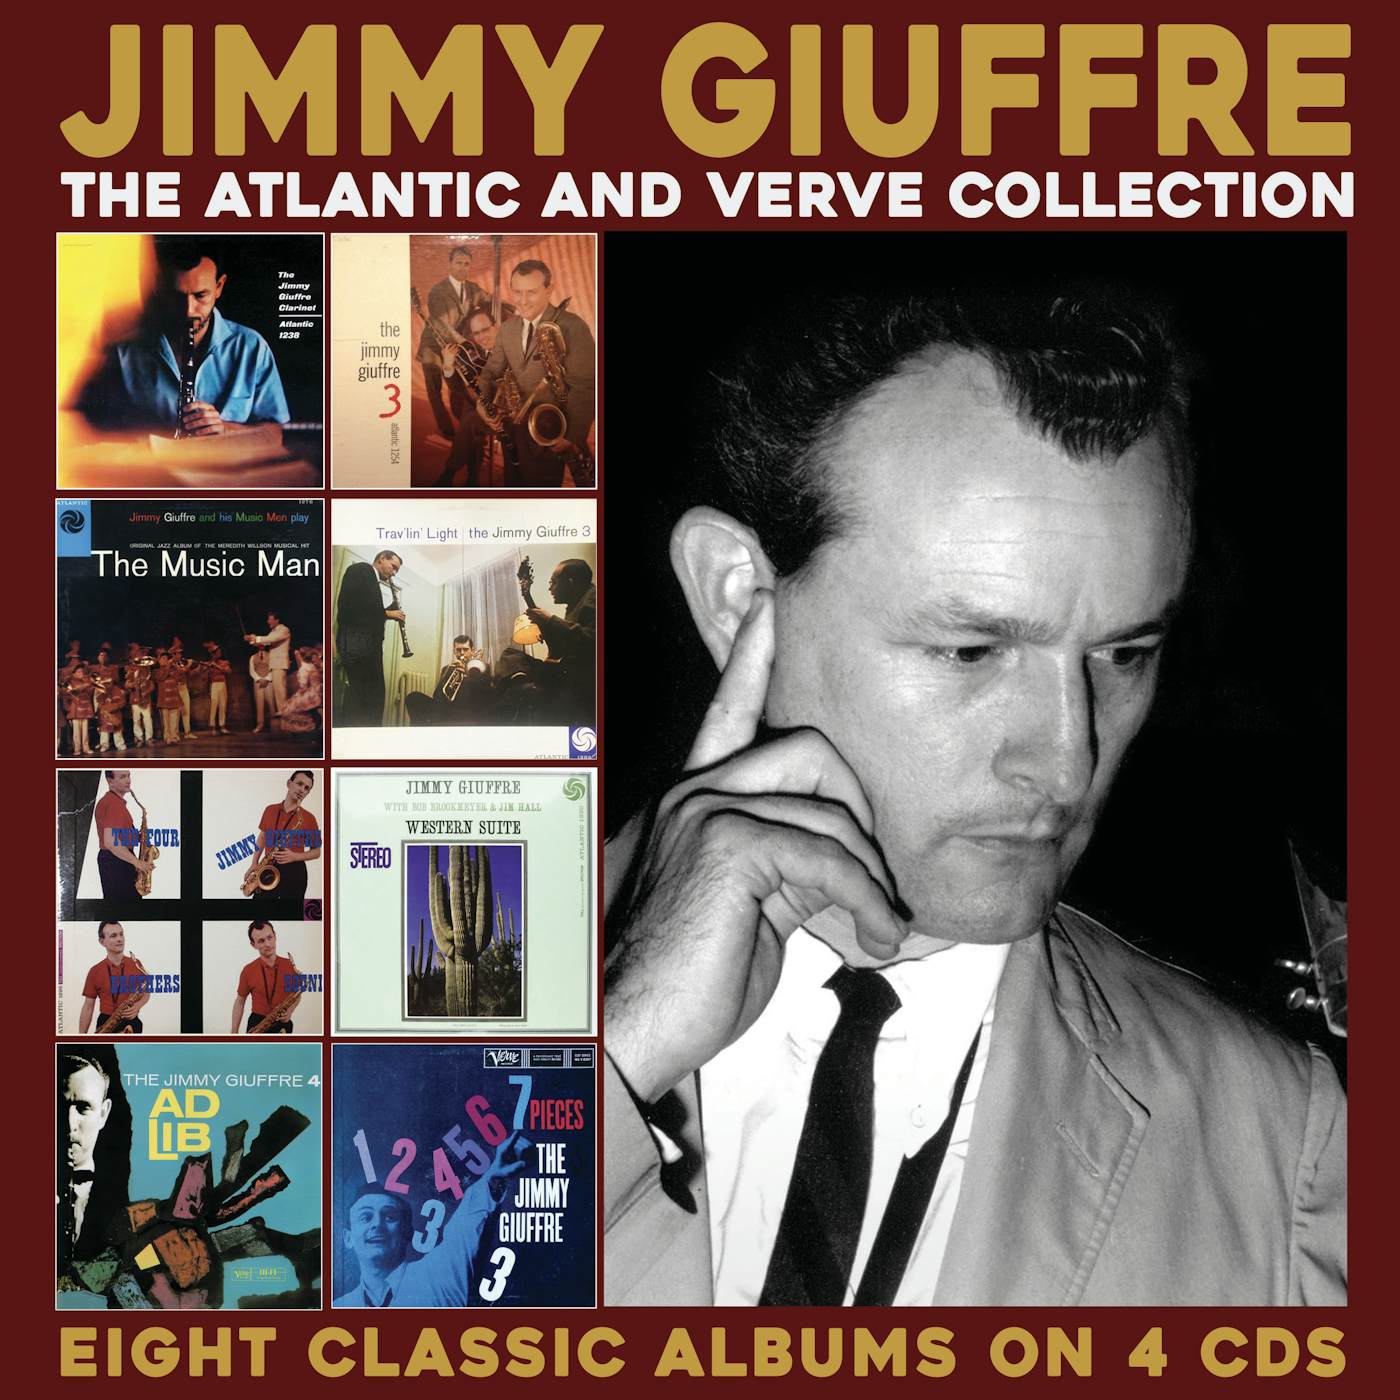 Jimmy Giuffre ATLANTIC & VERVE COLLECTION CD